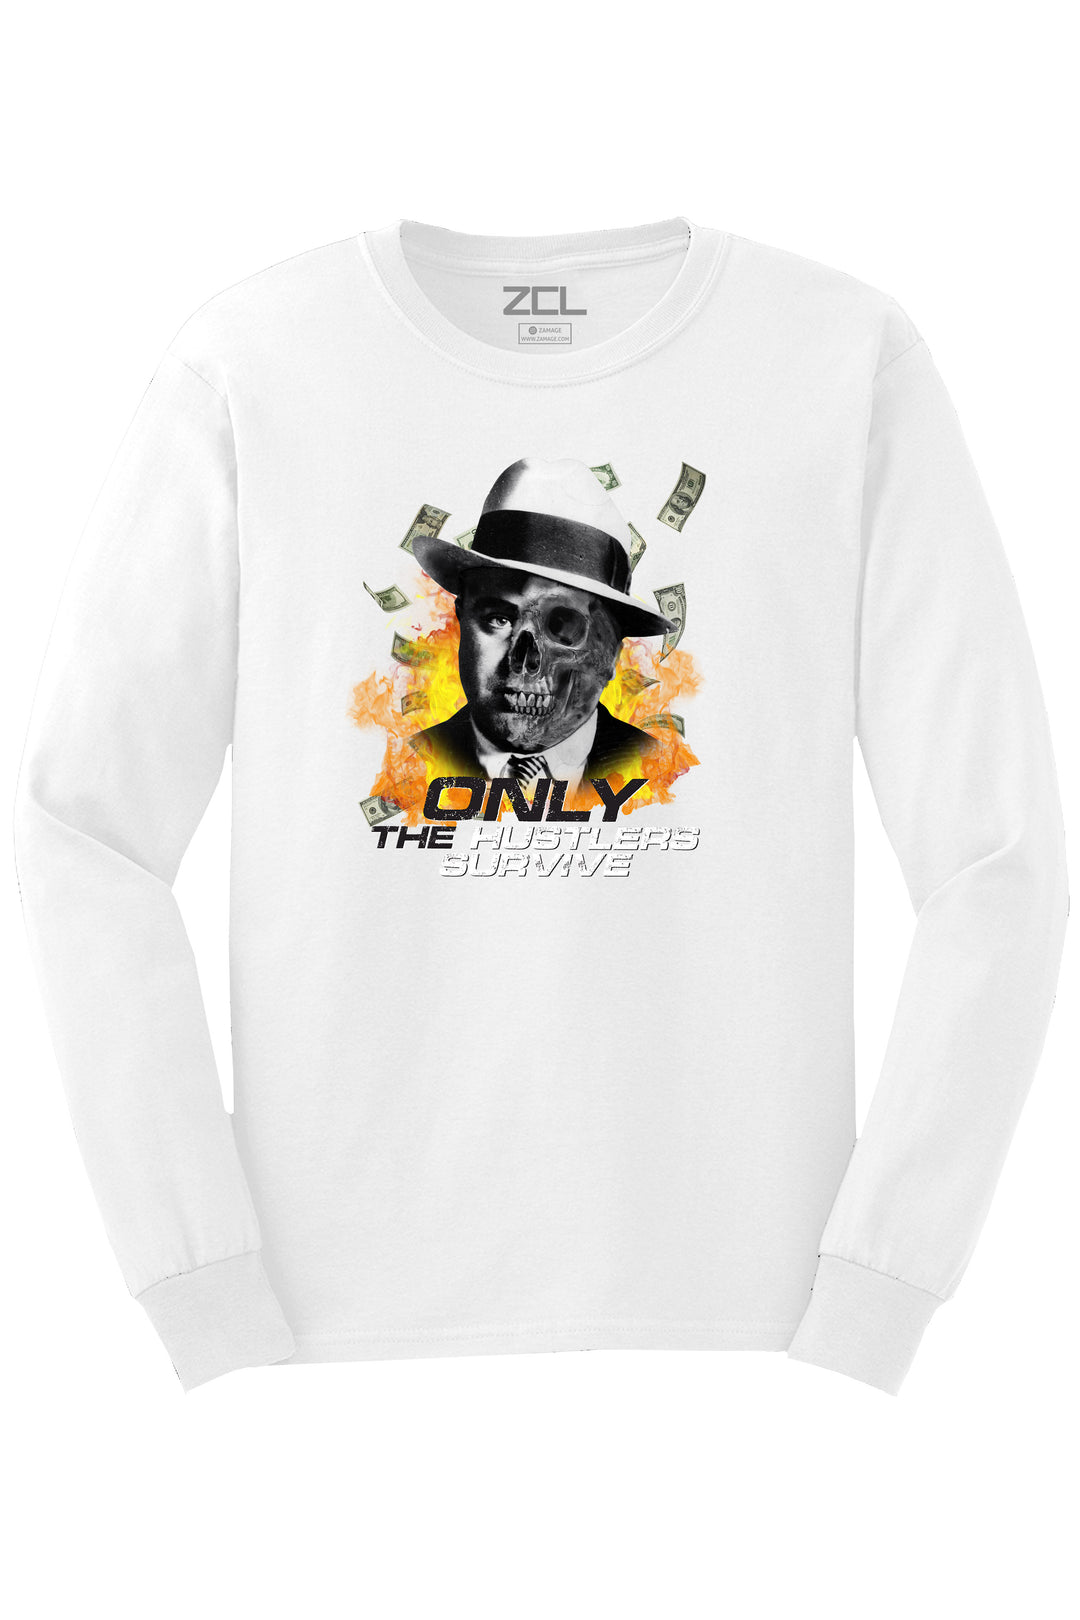 Only The Hustlers Survive Long Sleeve Tee (Multi Color Logo) - Zamage